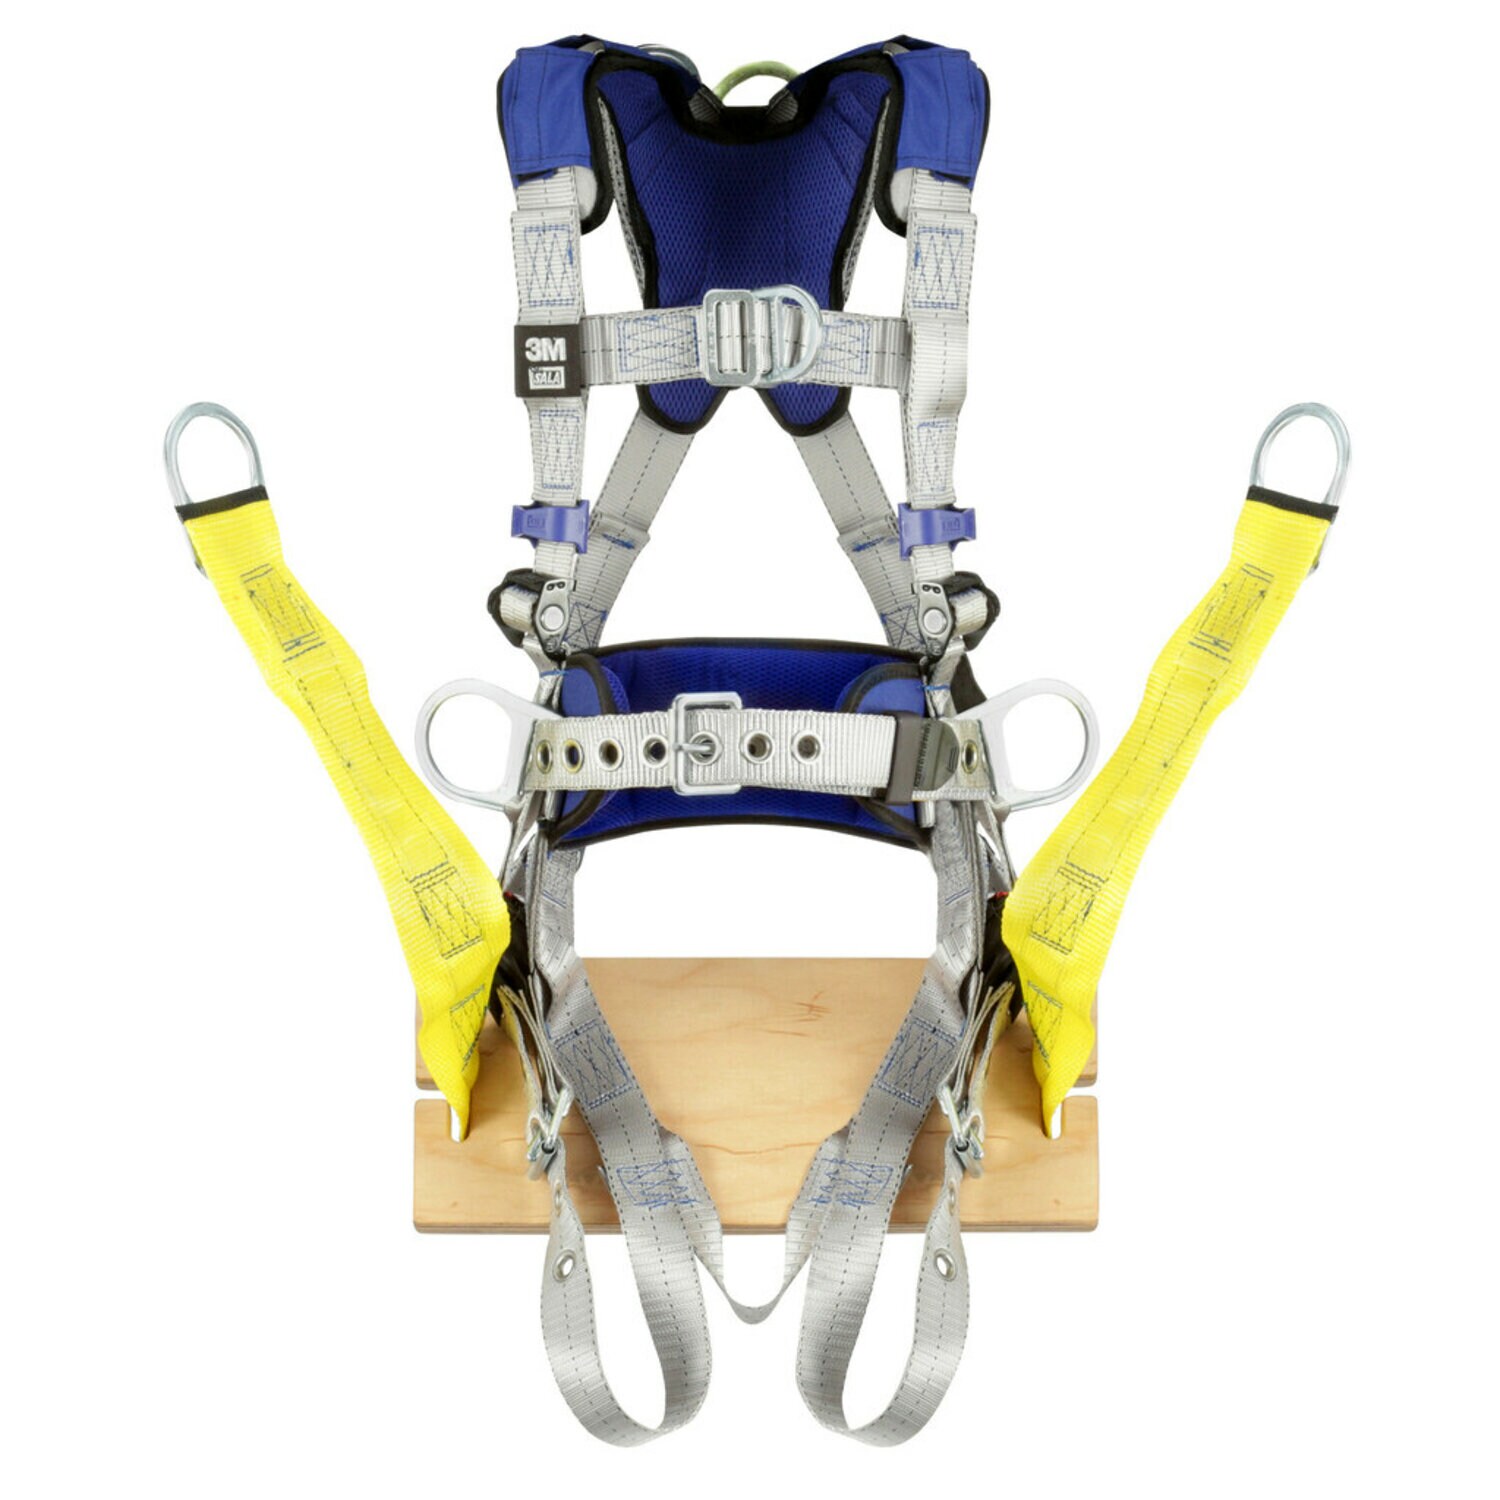 7012817631 - 3M DBI-SALA ExoFit X100 Comfort Construction Oil and Gas Climbing/Positioning/Suspension Safety Harness 1401149, 2X